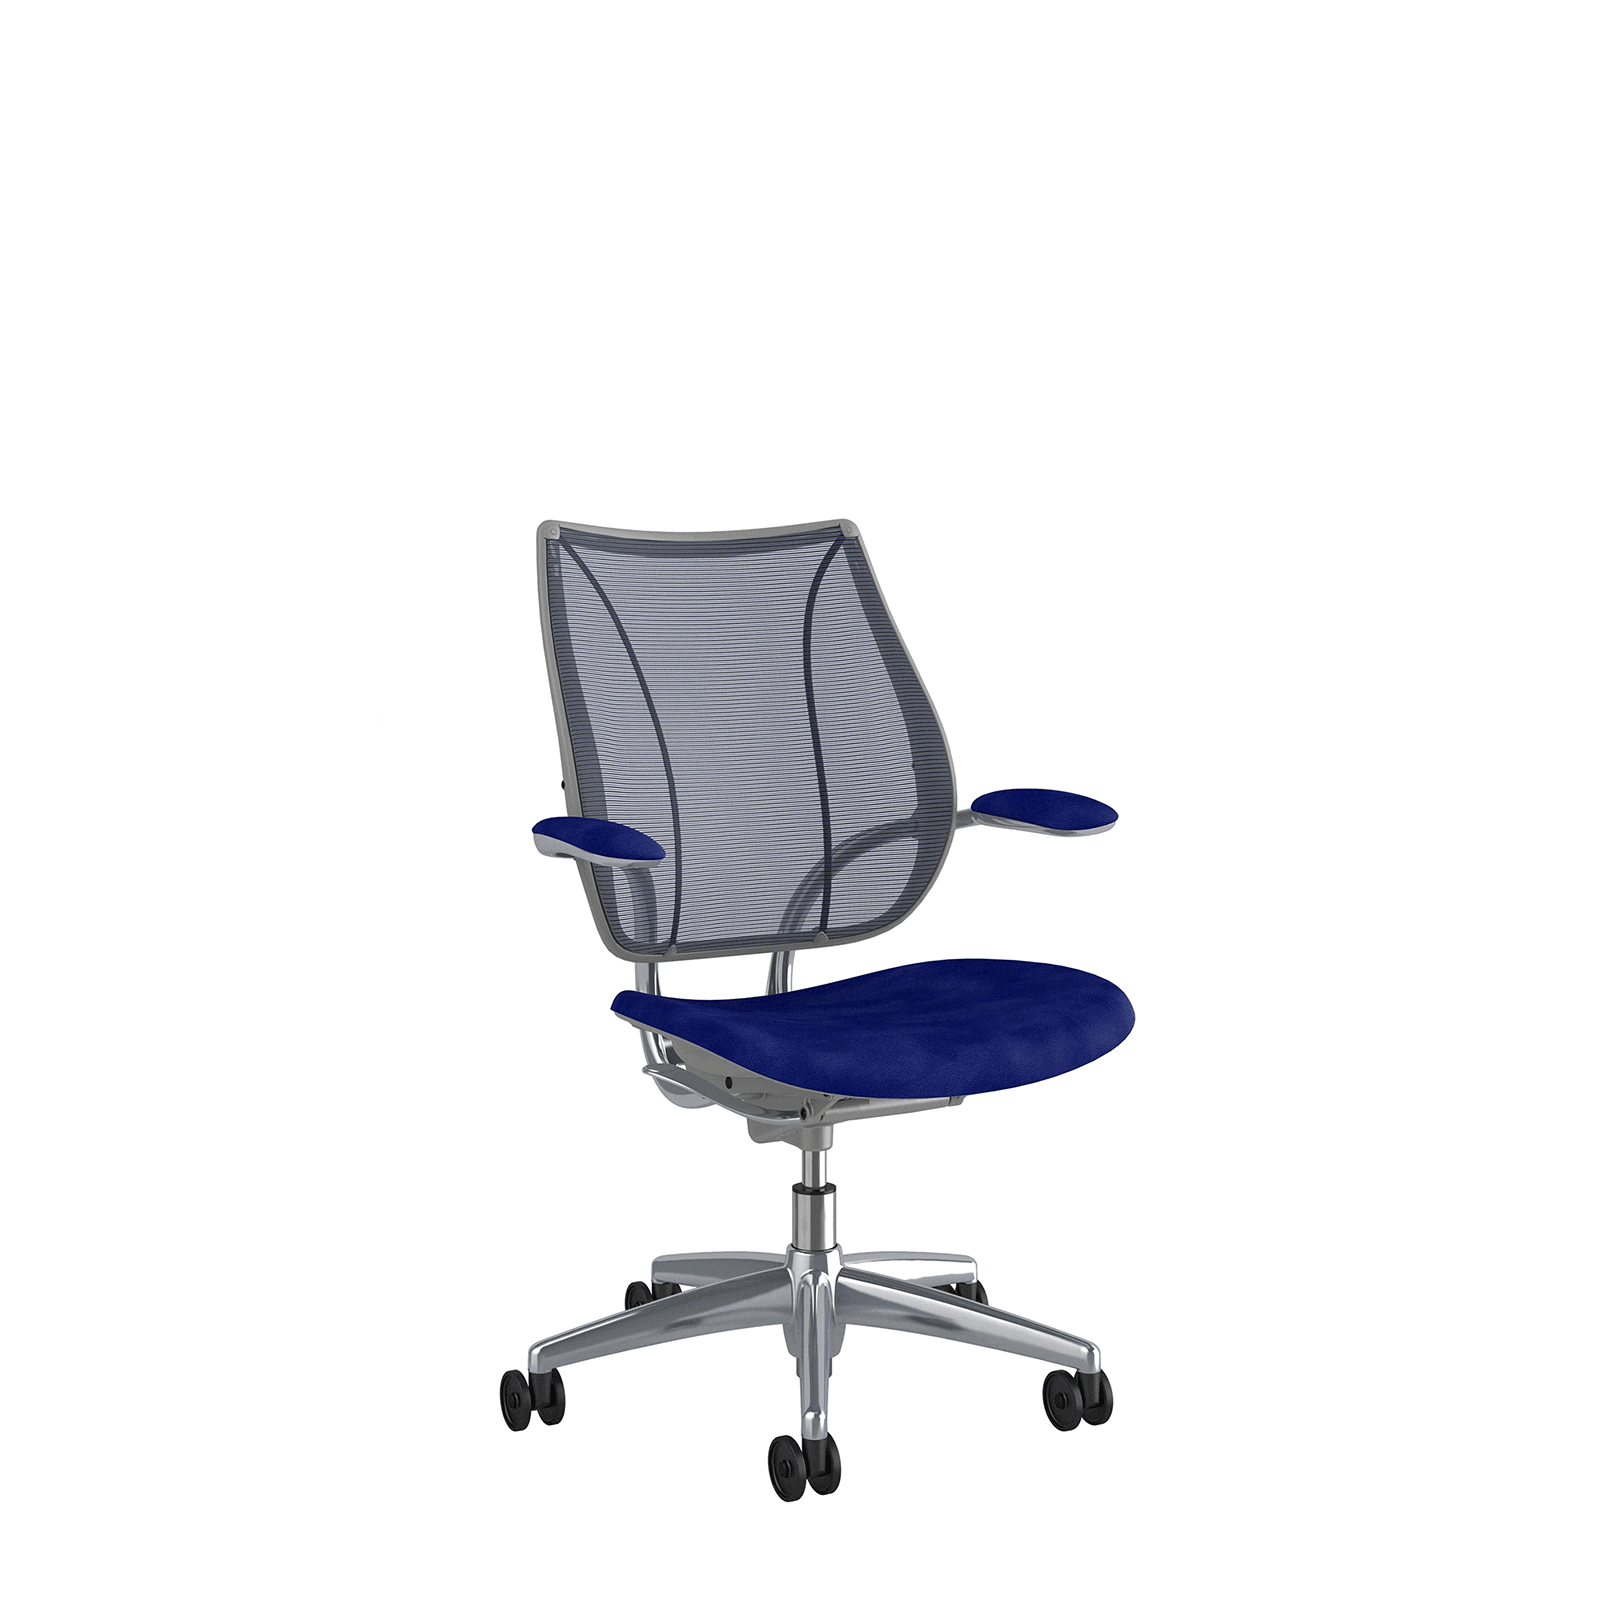 Humanscale Liberty Chair: The perfect chair for your active and stylish workspace